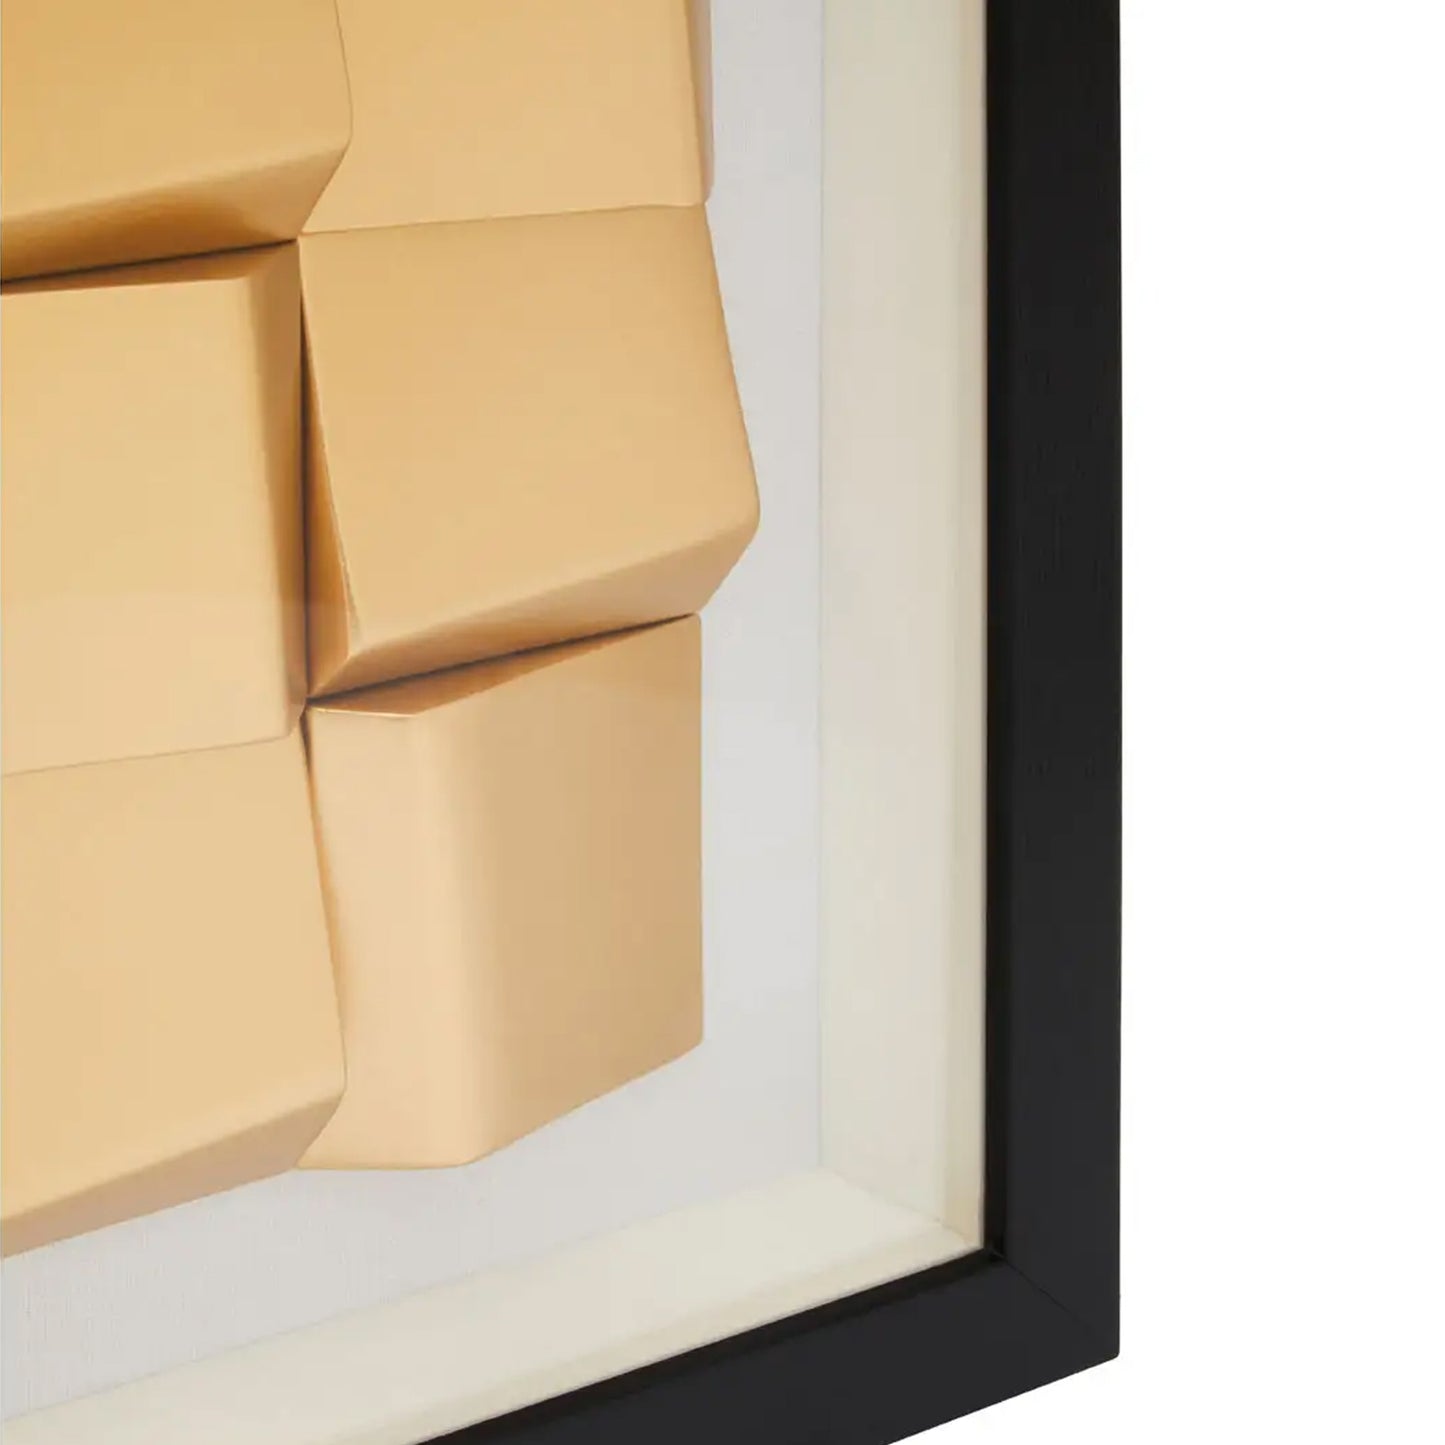 Gold Cube Wall Art In Box Frame